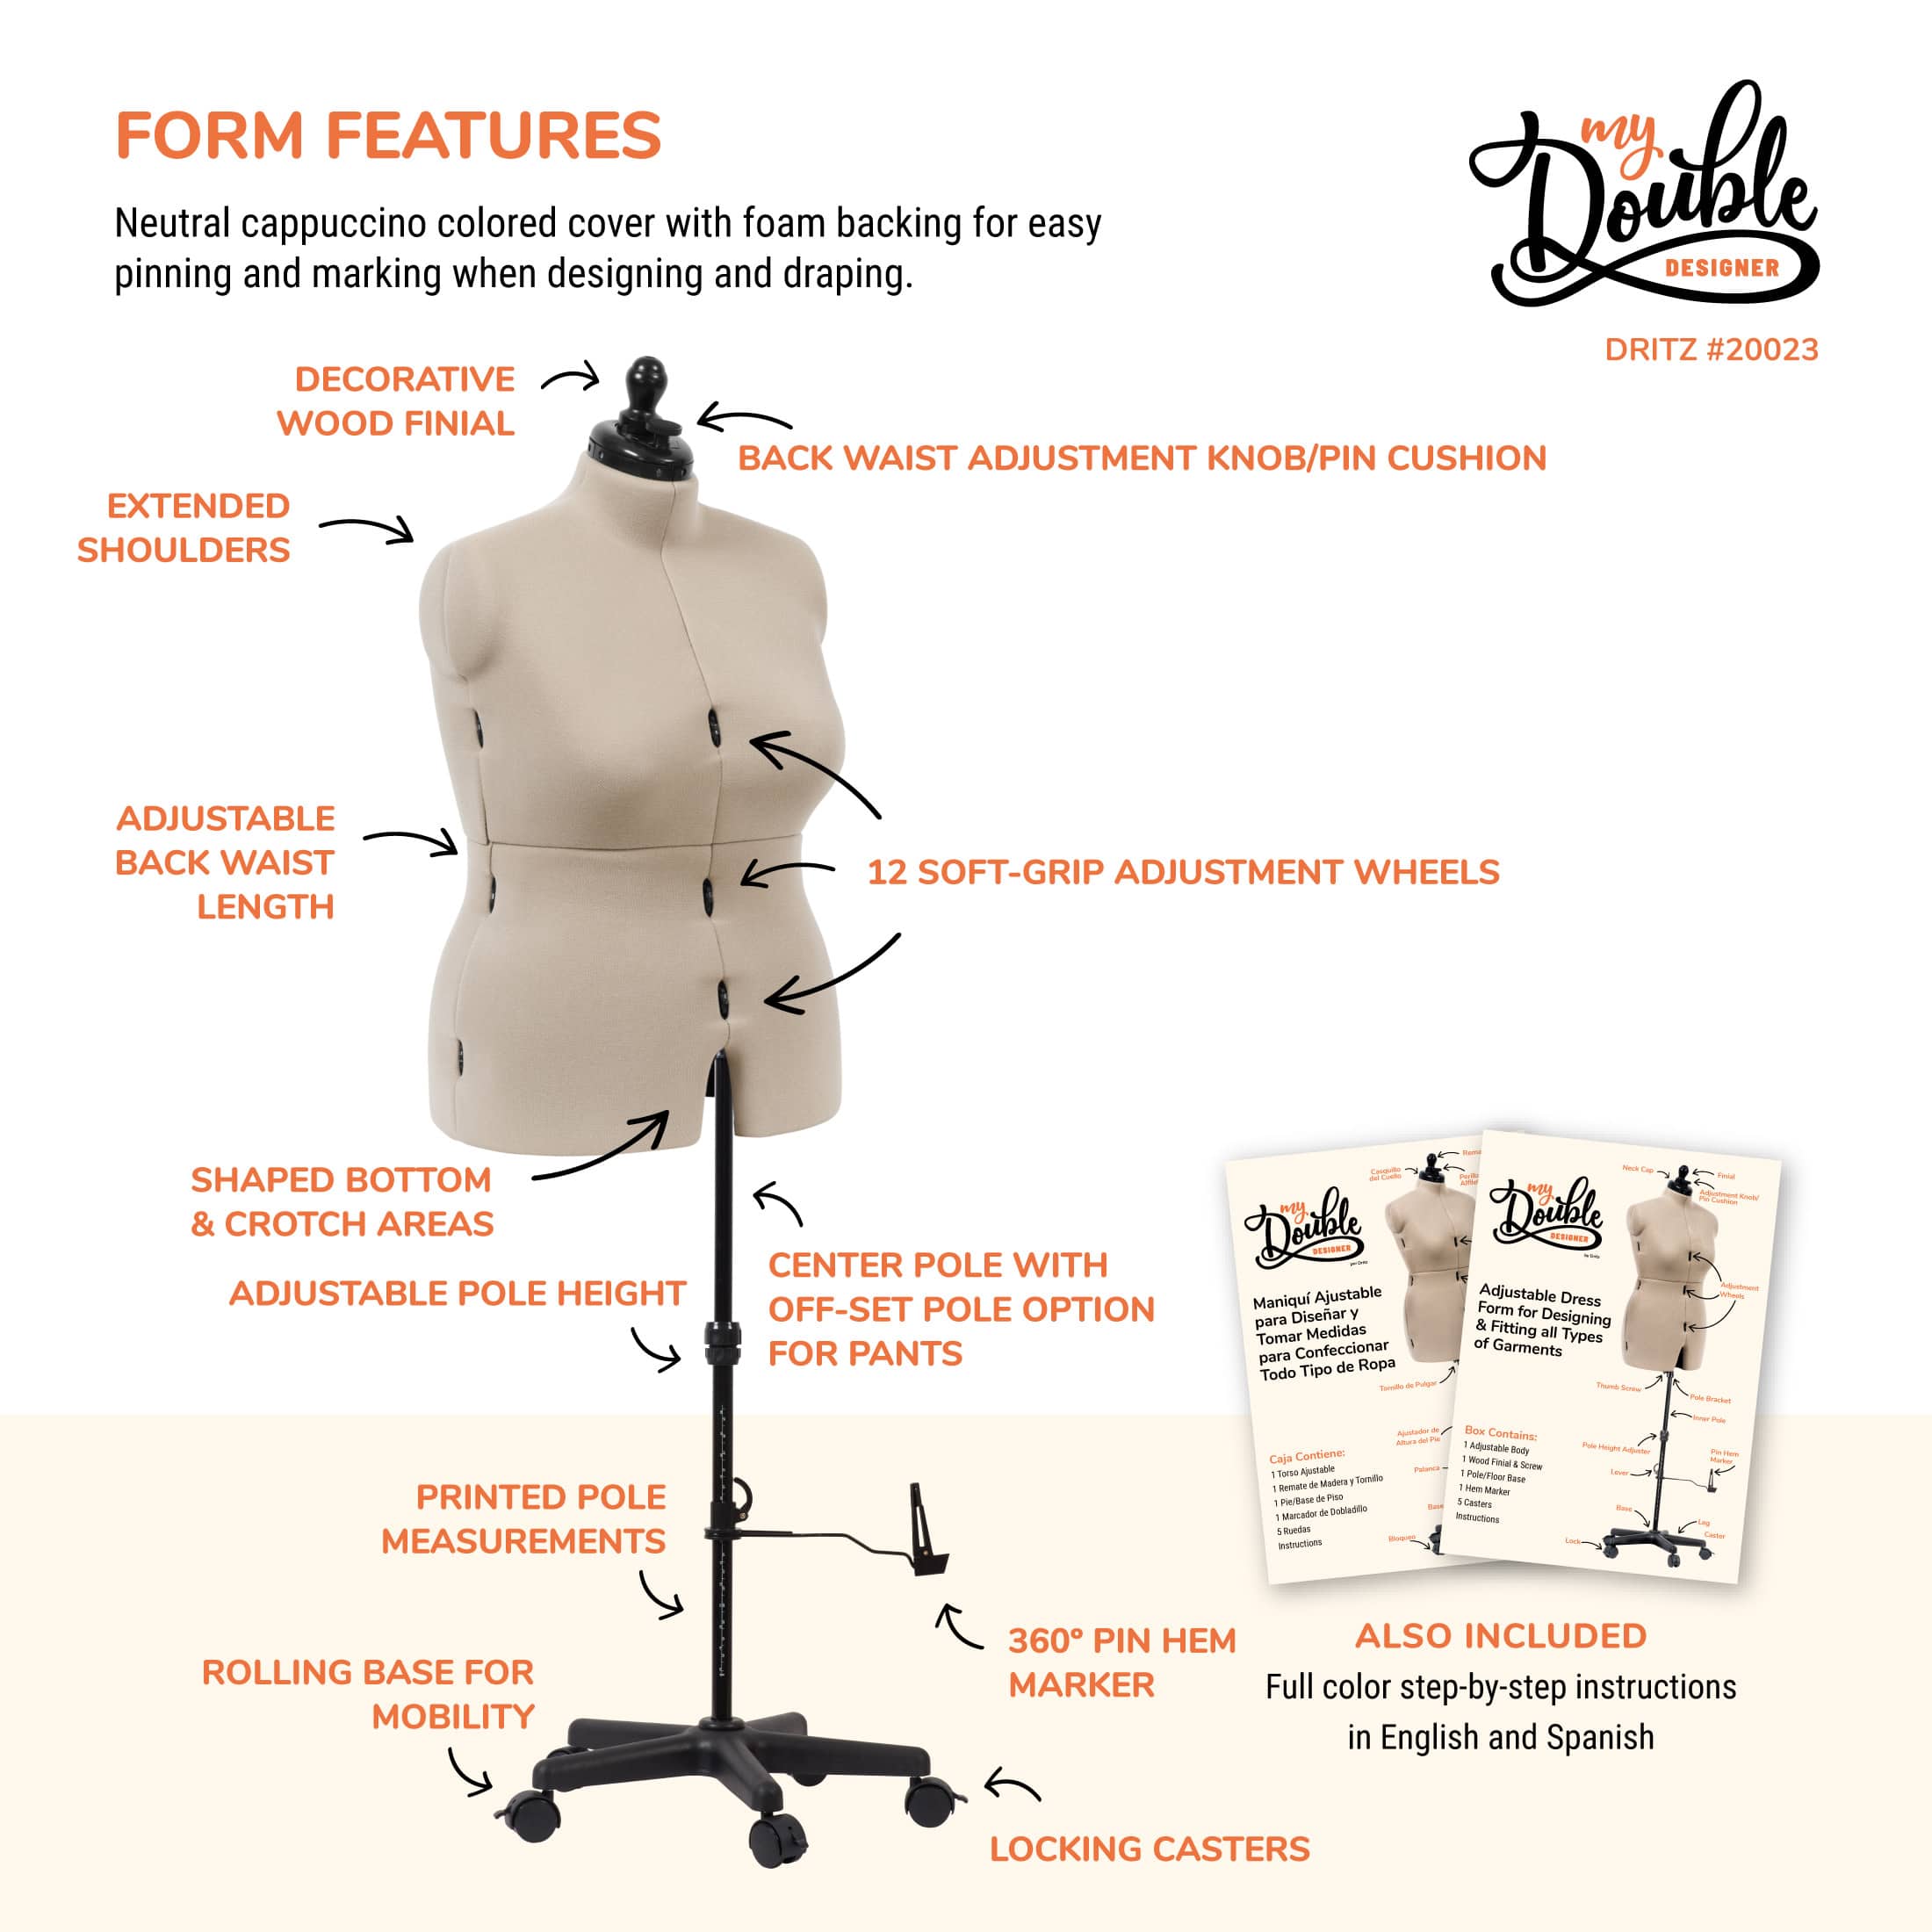 Dritz&#xAE; My Double Designer Full Figure Dress Form with Adjustable Tri-Pod Stand